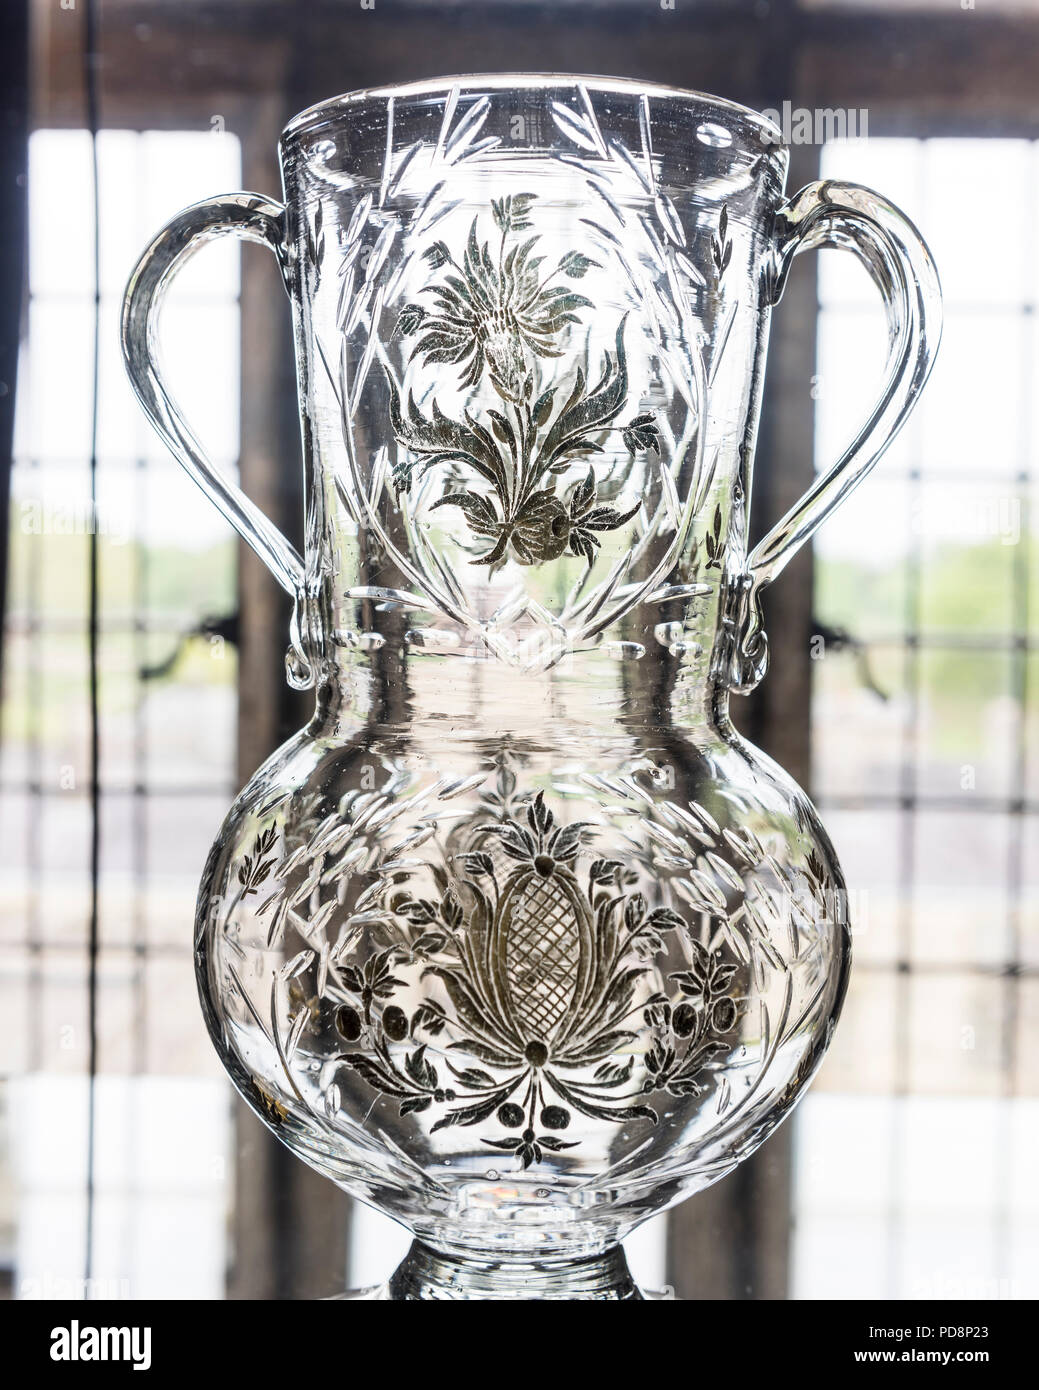 Antique Glass Vase High Resolution Stock Photography and Images - Alamy